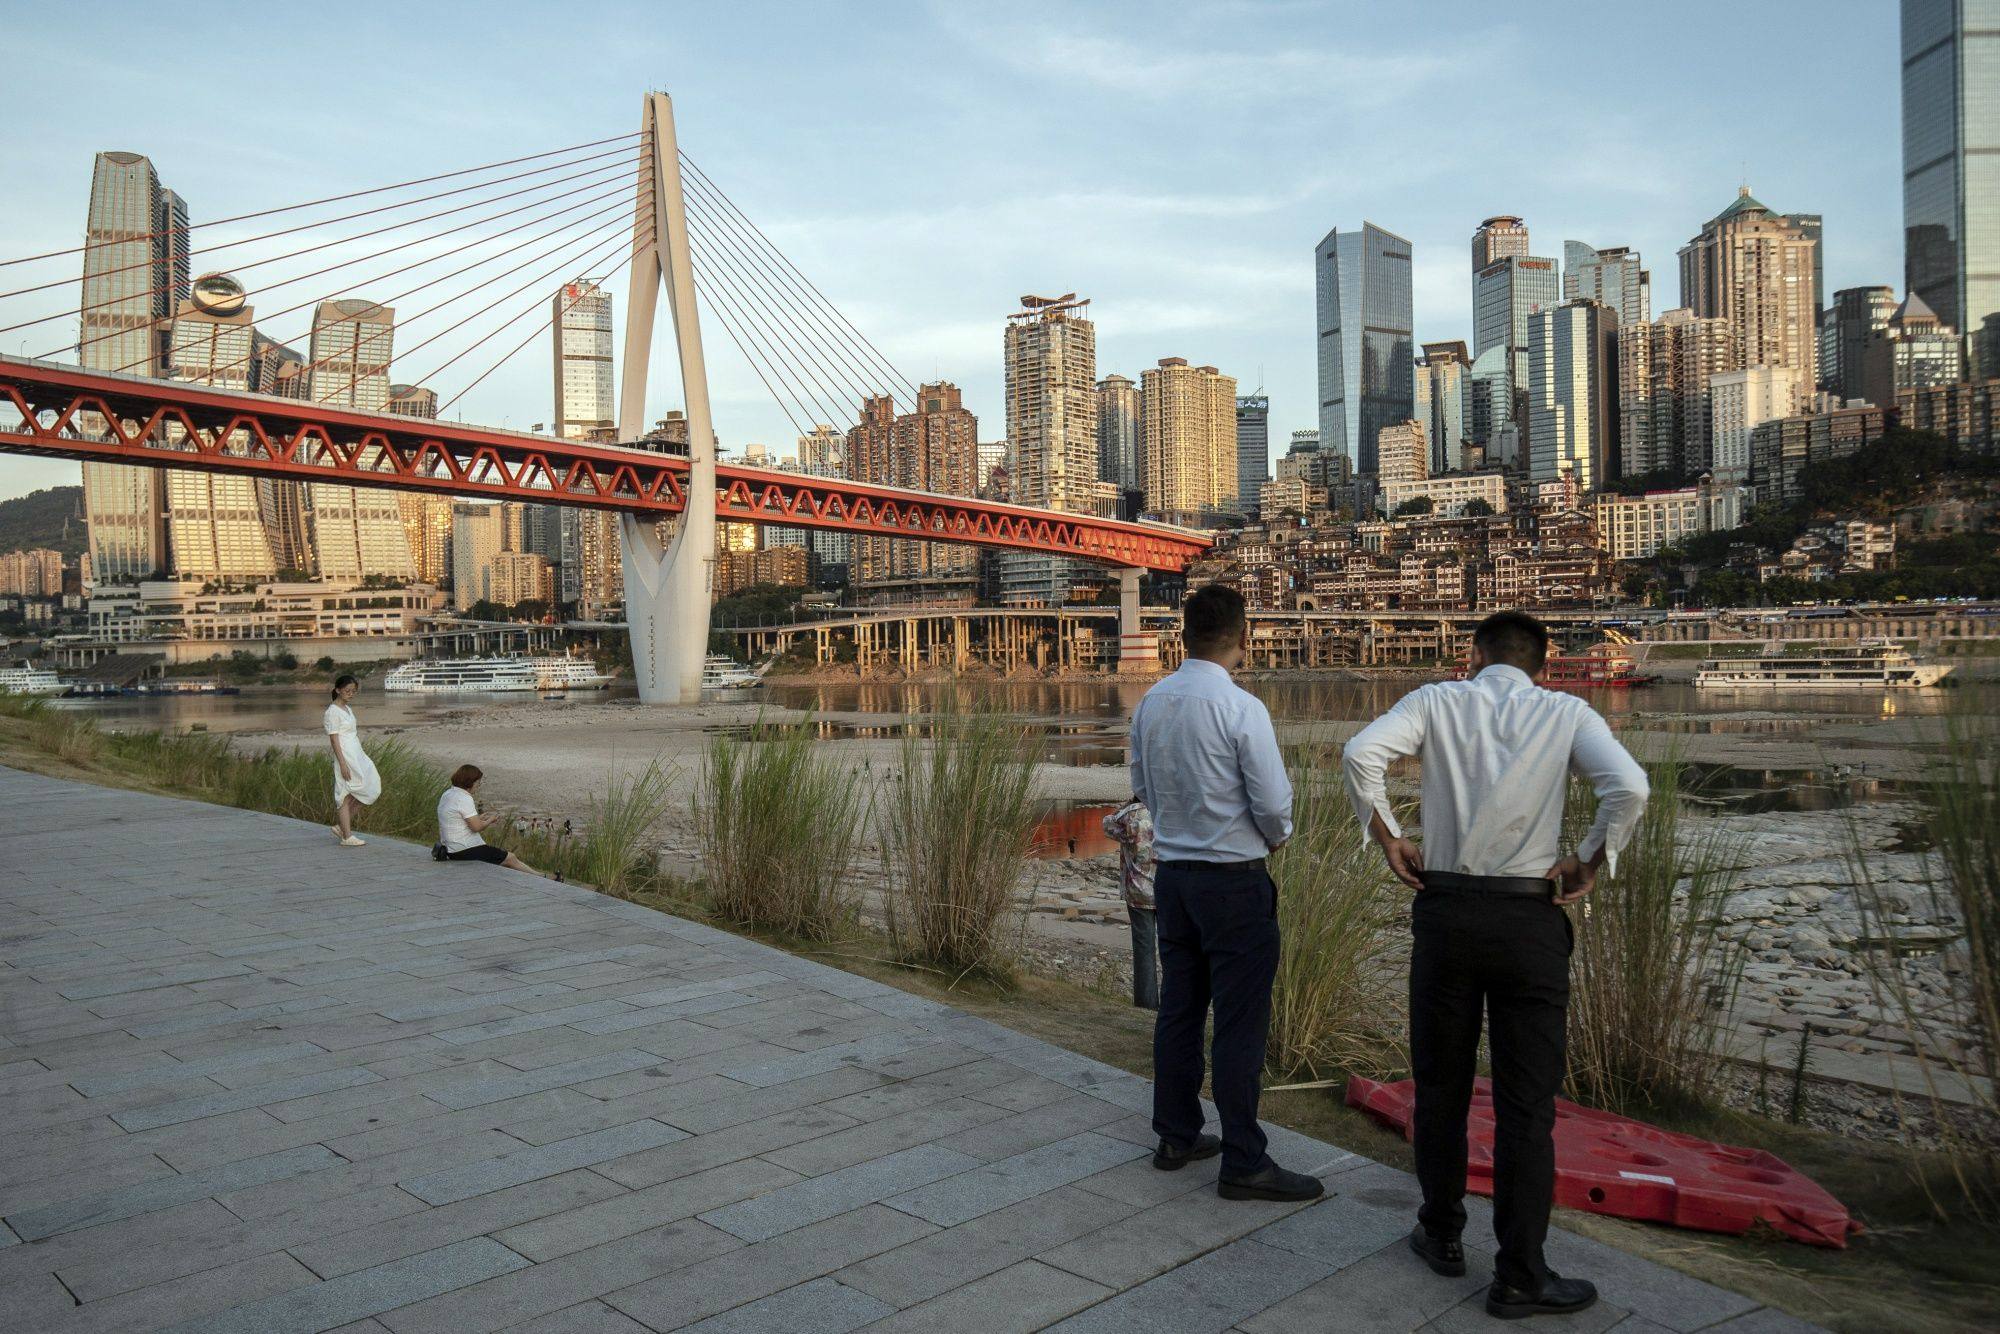 People look out at the drought-hit Jialing River near the confluence with the Yangtze River, in Chongqing, on August 17. Water levels on parts of the Yangtze, China’s largest waterway and home to its top hydropower station, dropped to the lowest on record for this time of year, according to state media reports. Photo: Bloomberg